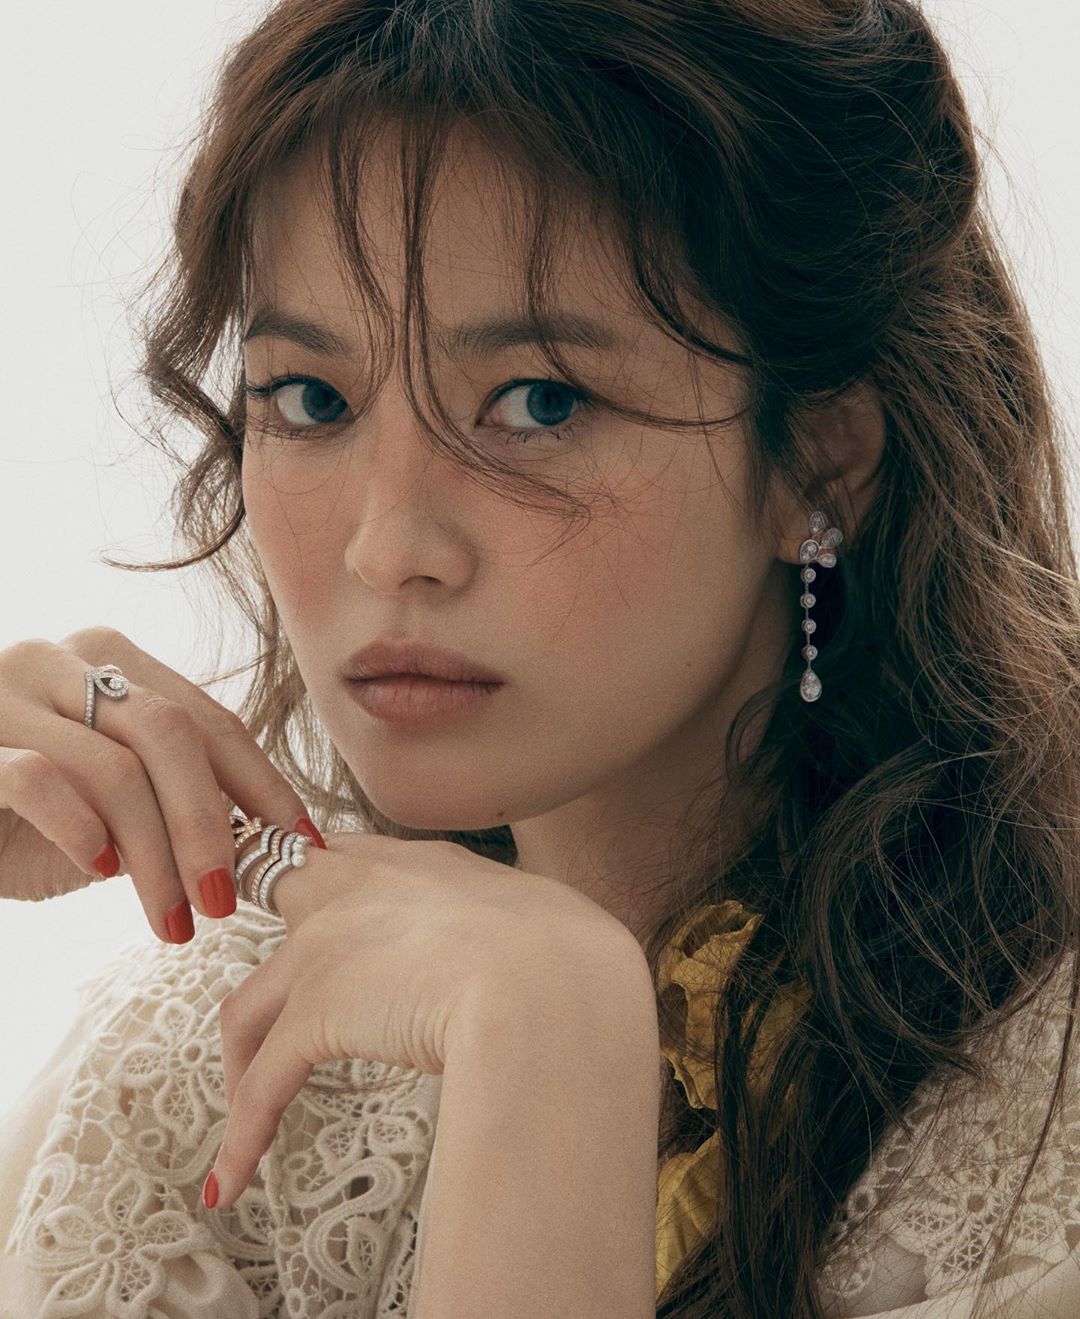 Actor Song Hye-kyo has released a picture with overseas fashion magazines.Song Hye-kyo posted several photos on her Instagram page on Monday.In the open photo, Song Hye-kyo completed the fashion with half-bundled wave hair styling and bold accessories.Song Hye-kyo captured the Sight of those who see it as a bright visual and unique elegance like Spring.Meanwhile, Song Hye-kyo is currently reviewing his next film.Photo: Song Hye-kyo Instagram